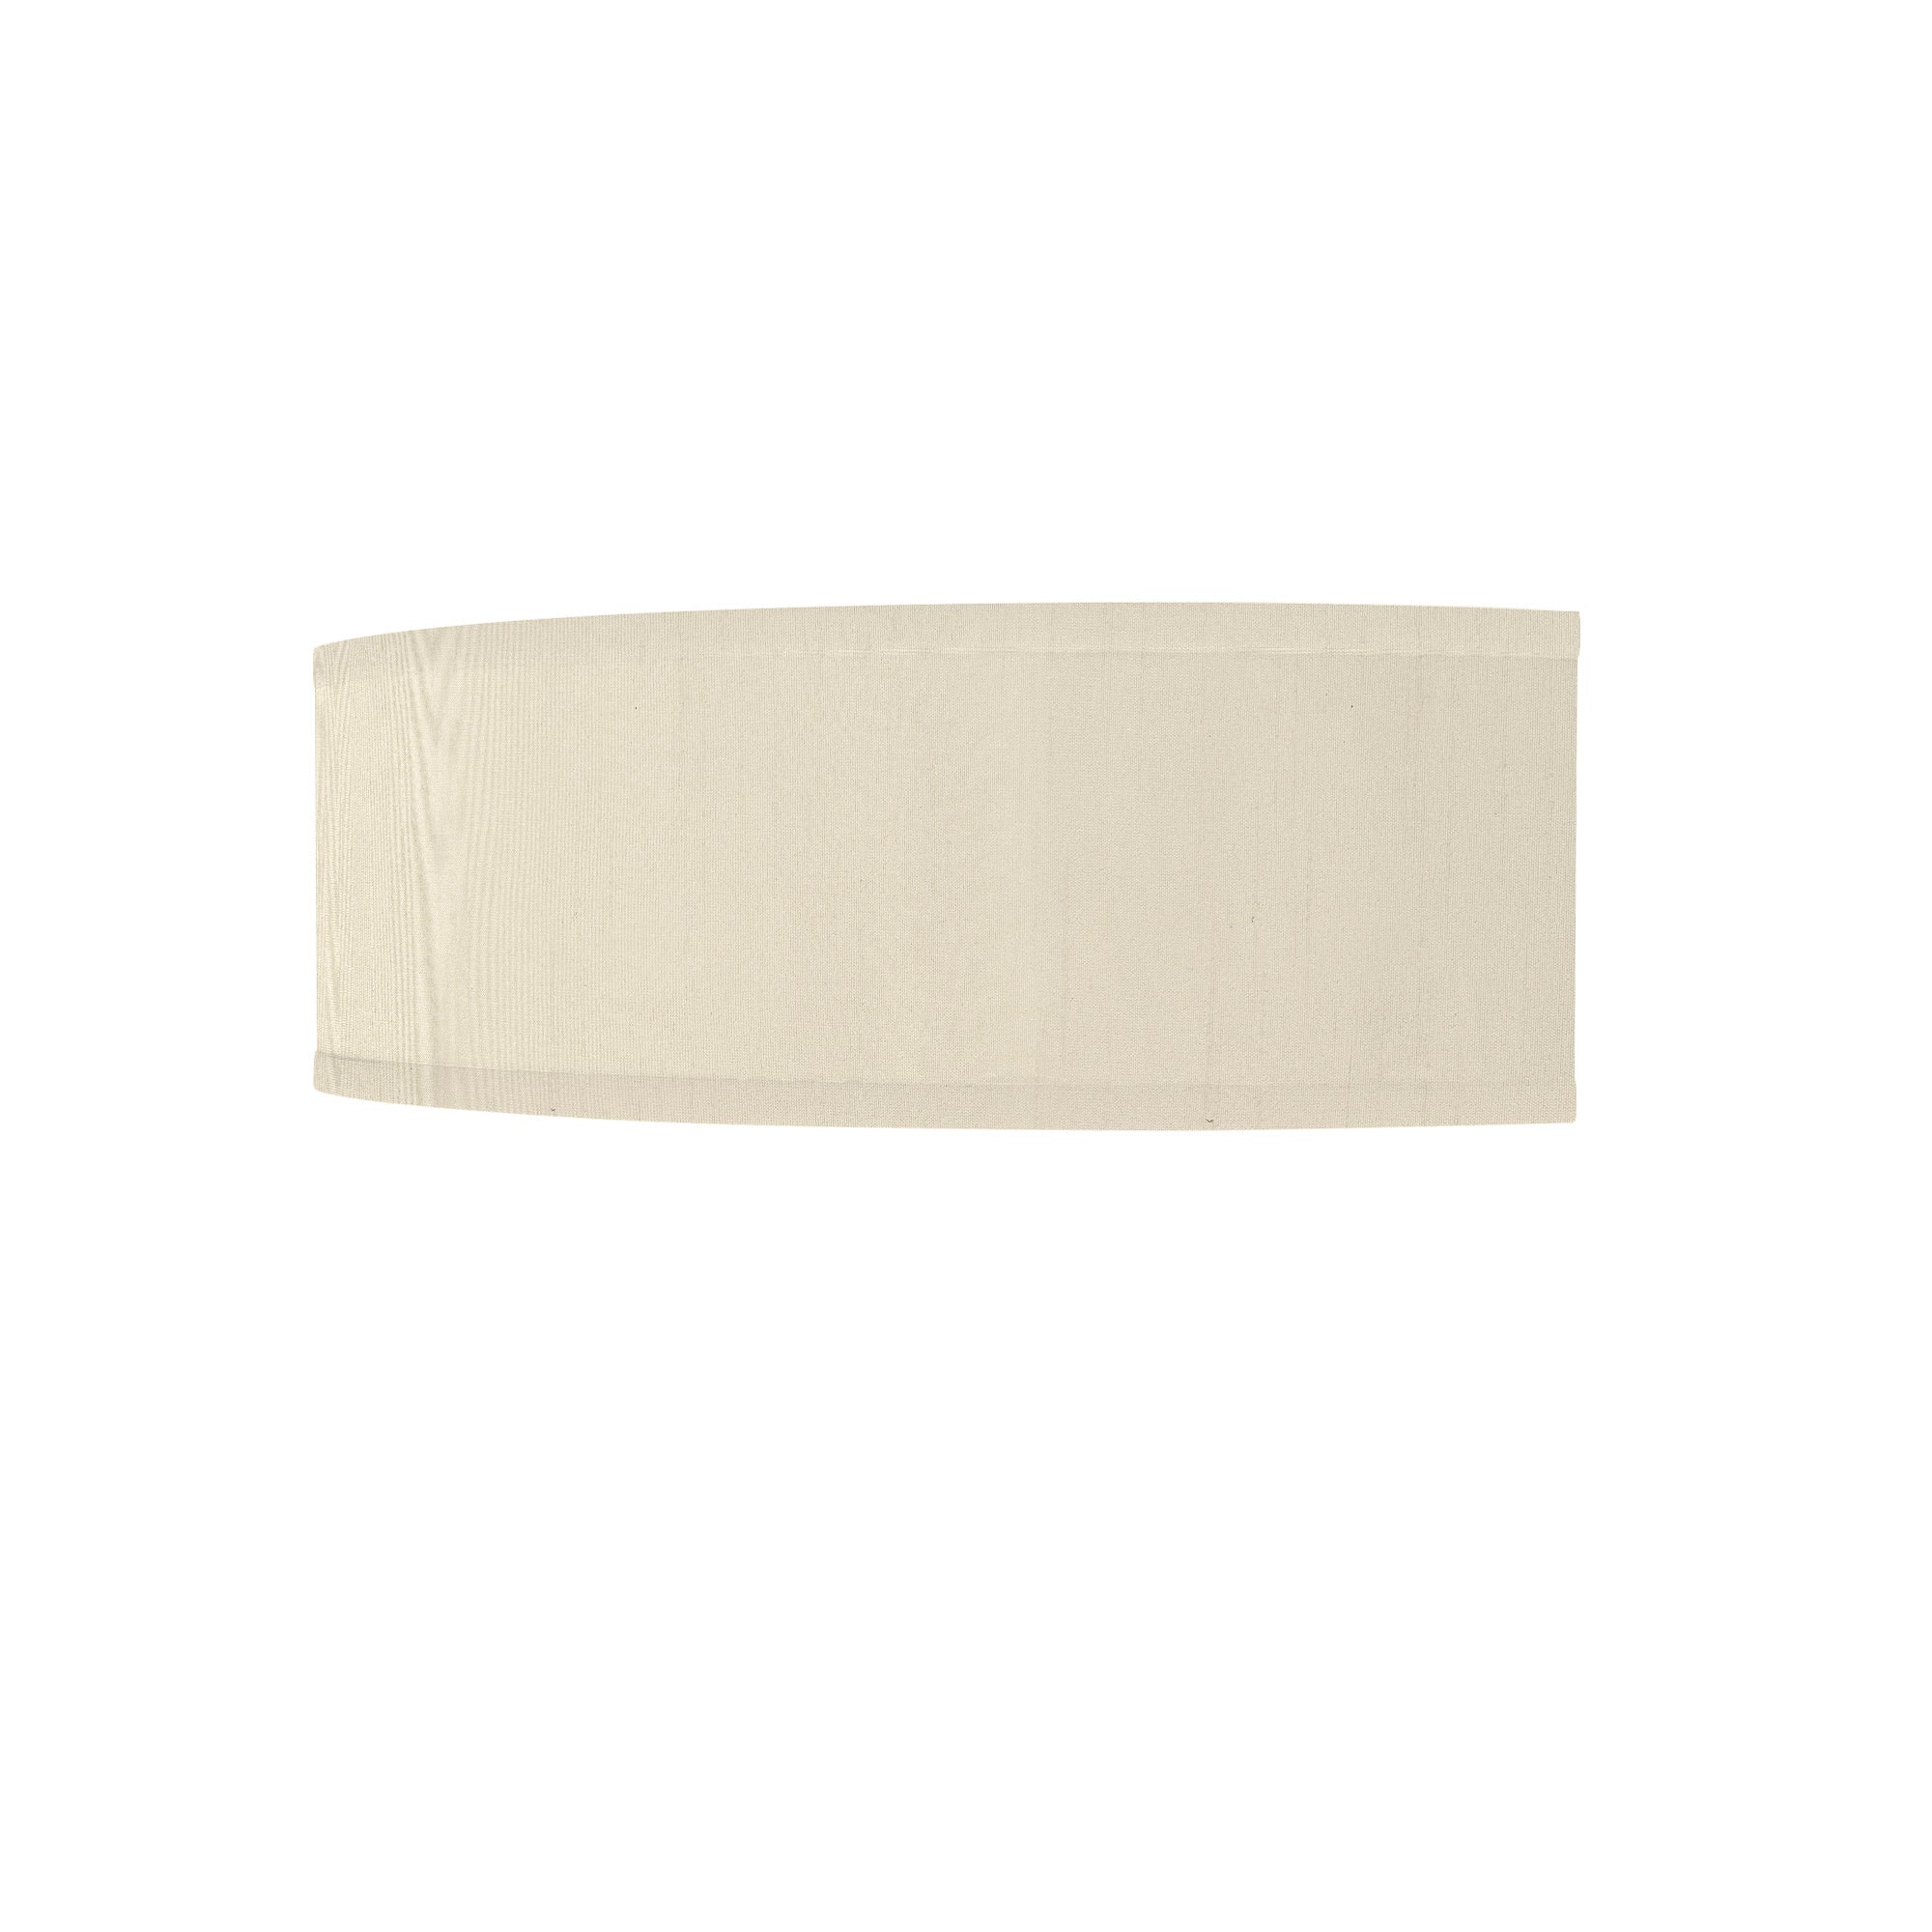 The Mora Wall Sconce from Seascape Fixtures with a silk shade in cream color.